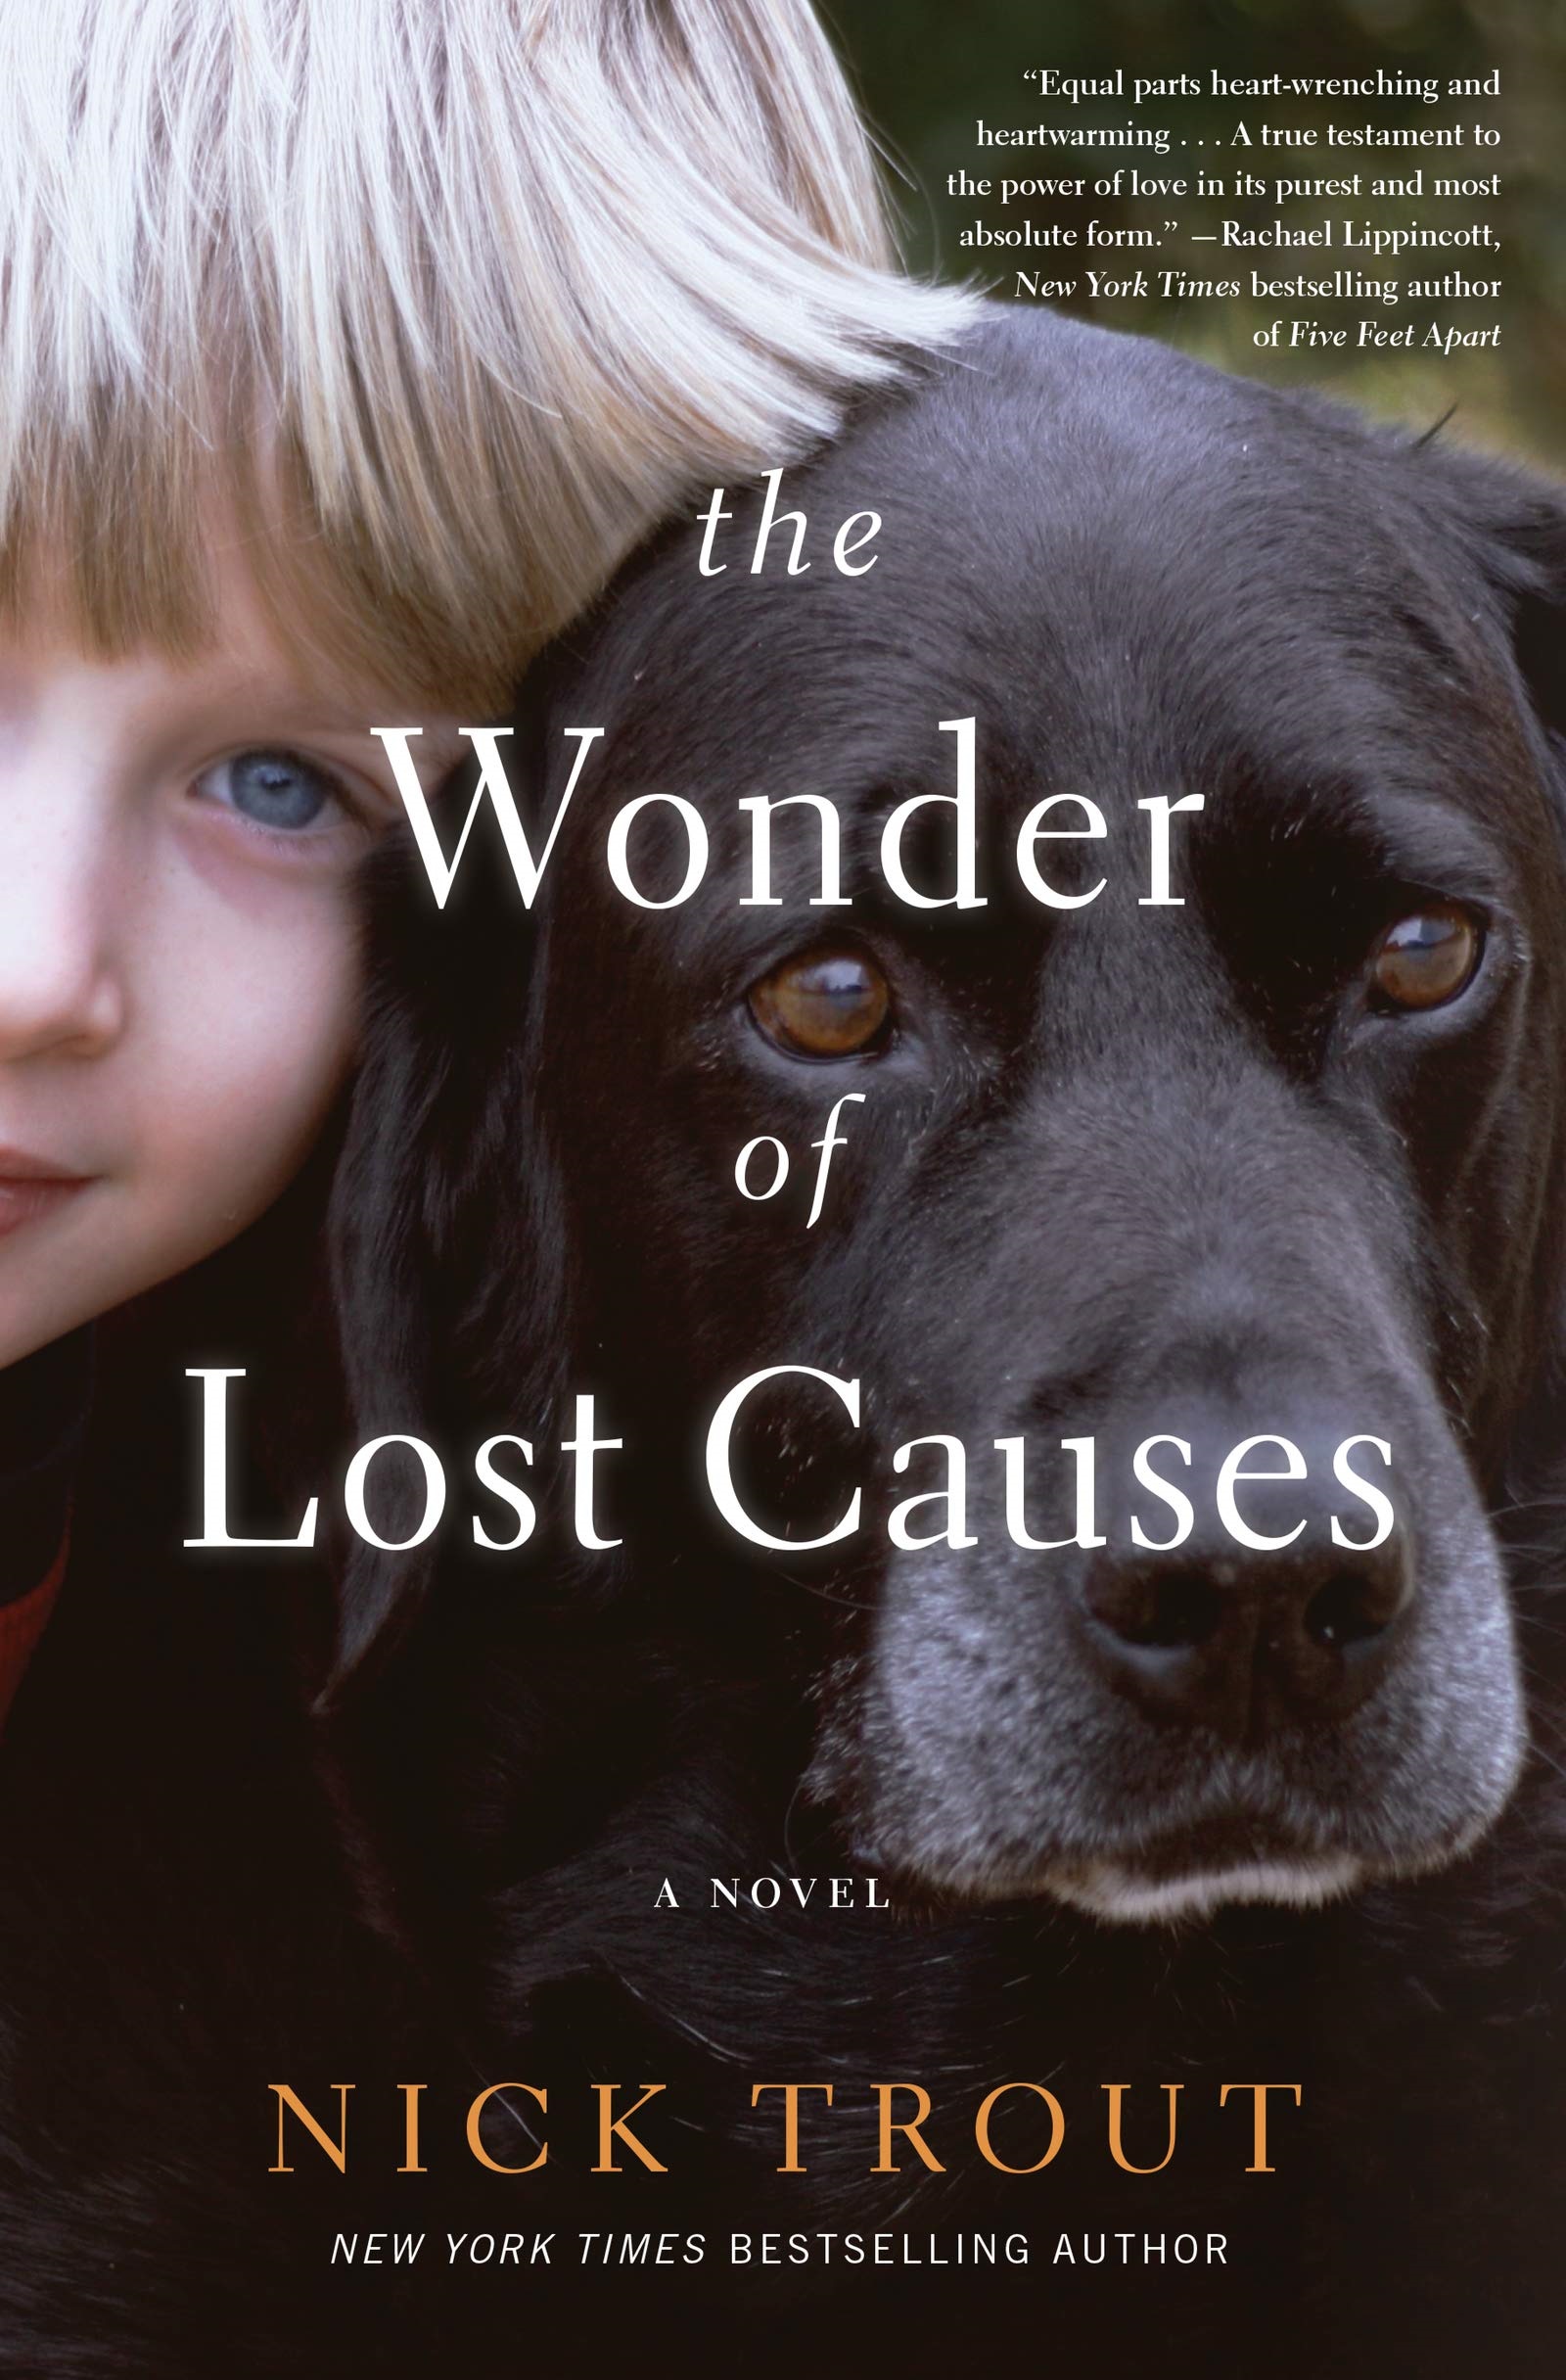 Book cover of Boy and Dog. The wonder of Lost Causes by Nick Trout.